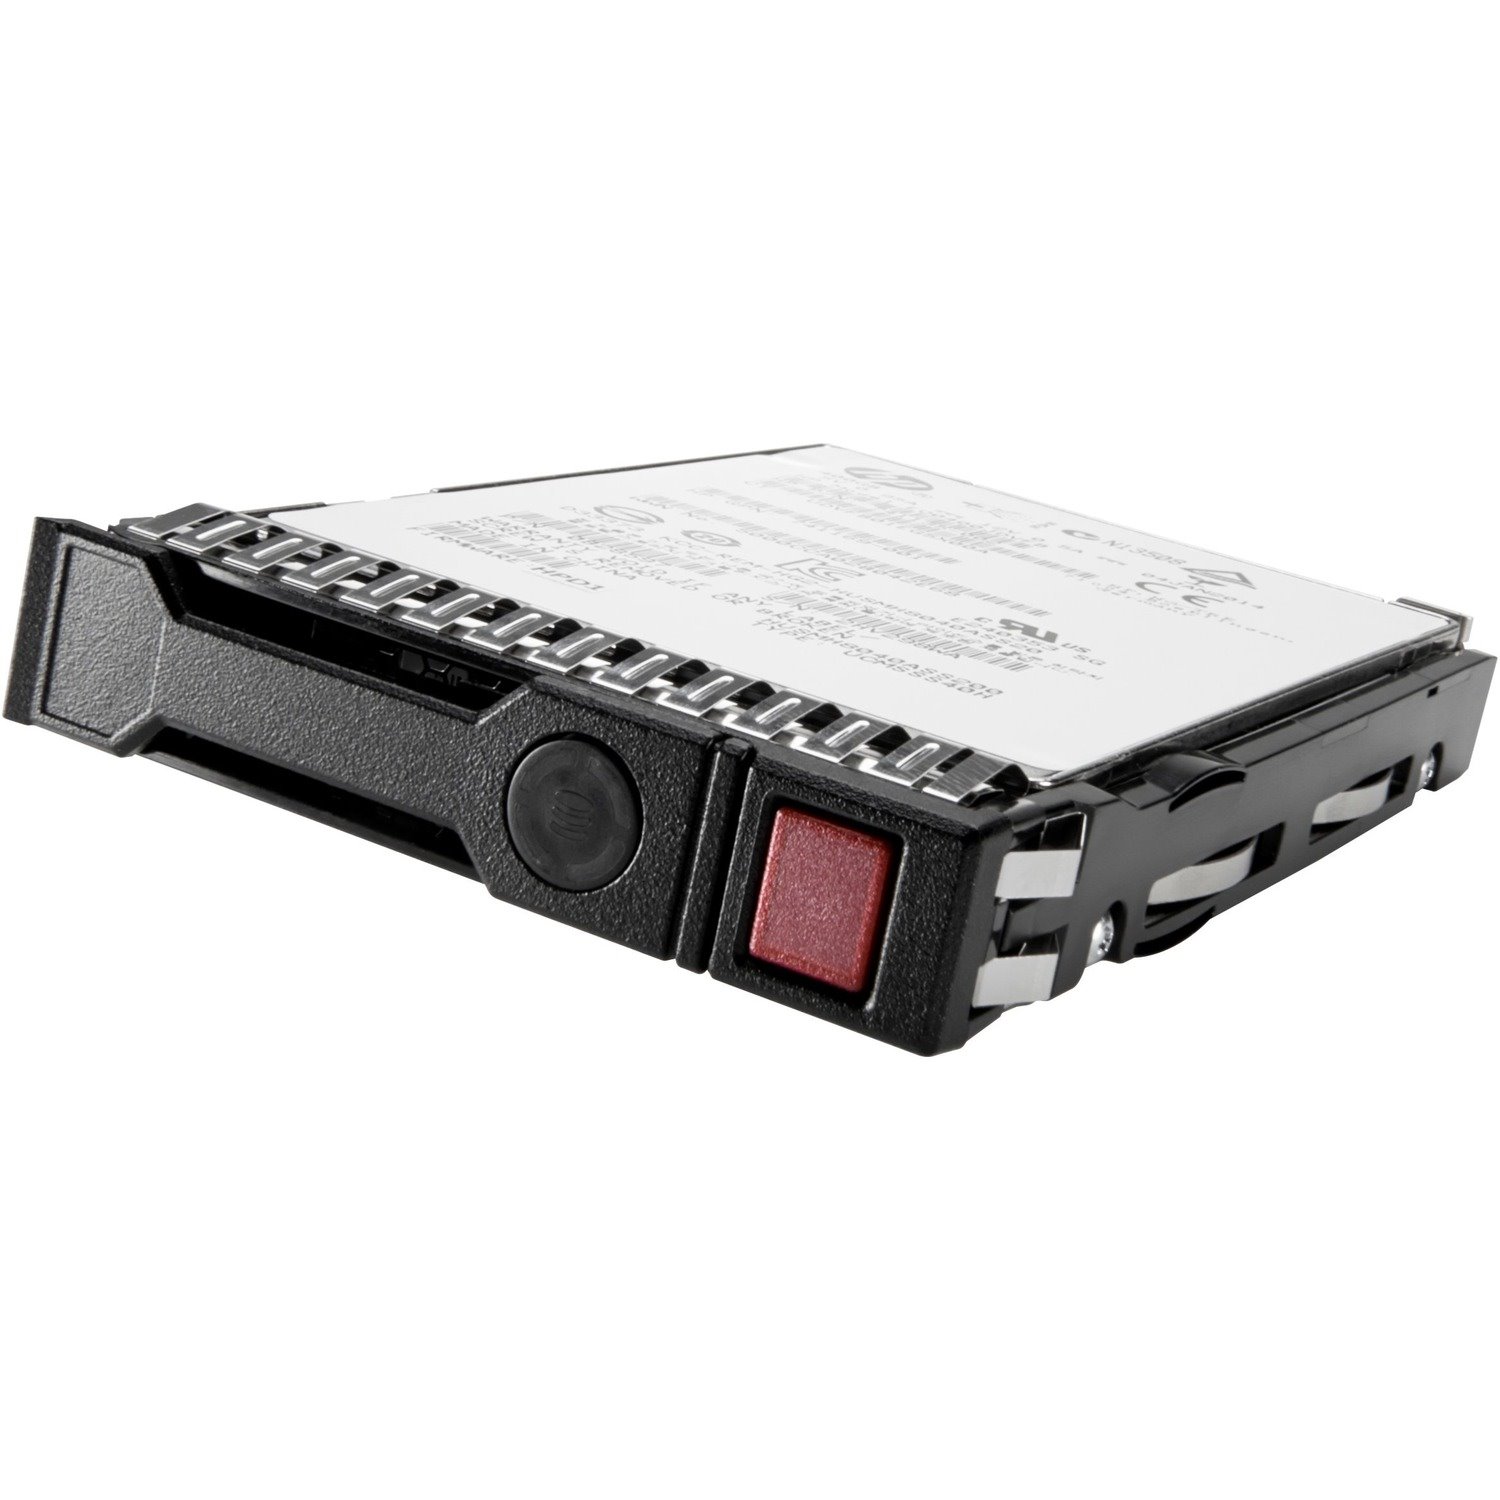 HPE Sourcing 480 GB Solid State Drive - 2.5" Internal - SATA (SATA/600)